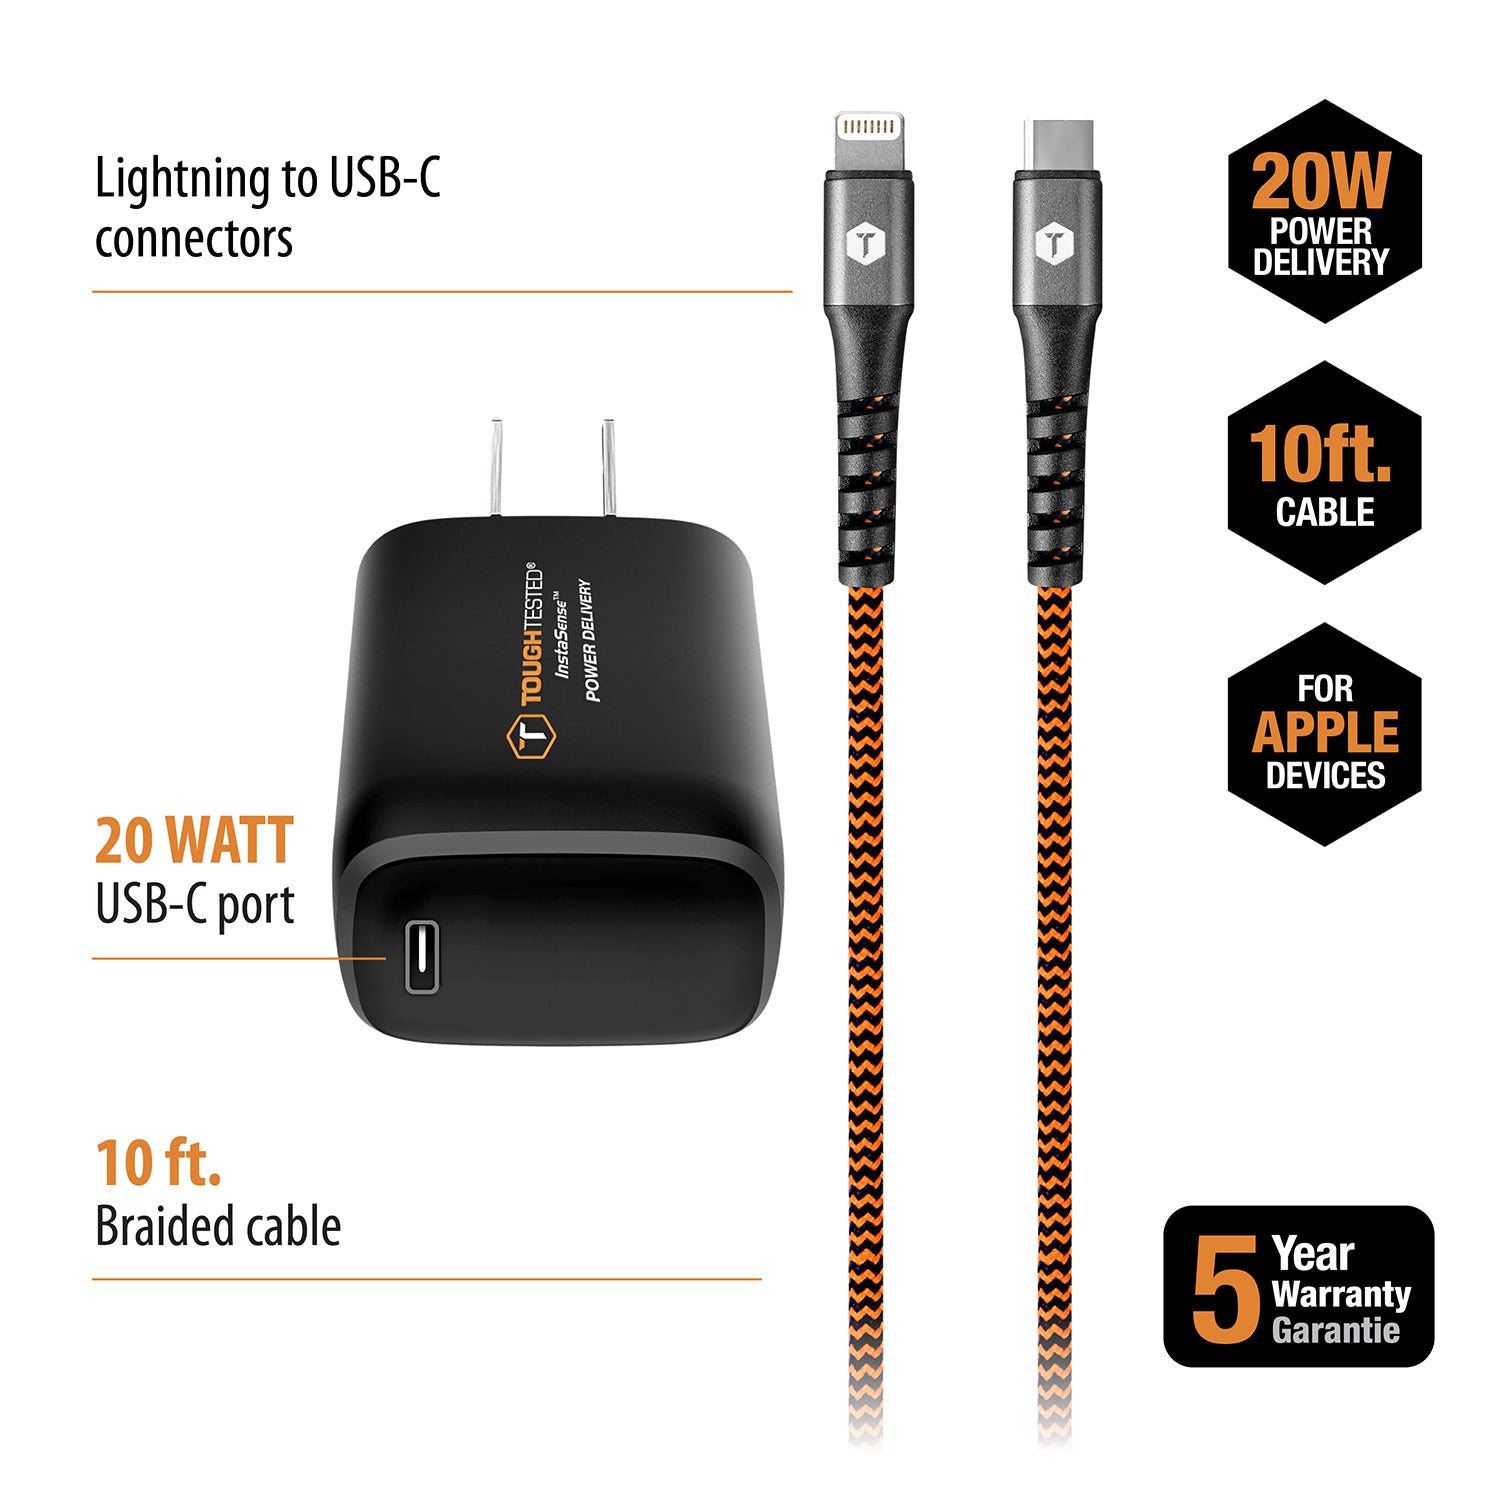 PD High Speed Wall Charger Kit with 20W USB-C Port and 10ft USB-C to Lightning Cable